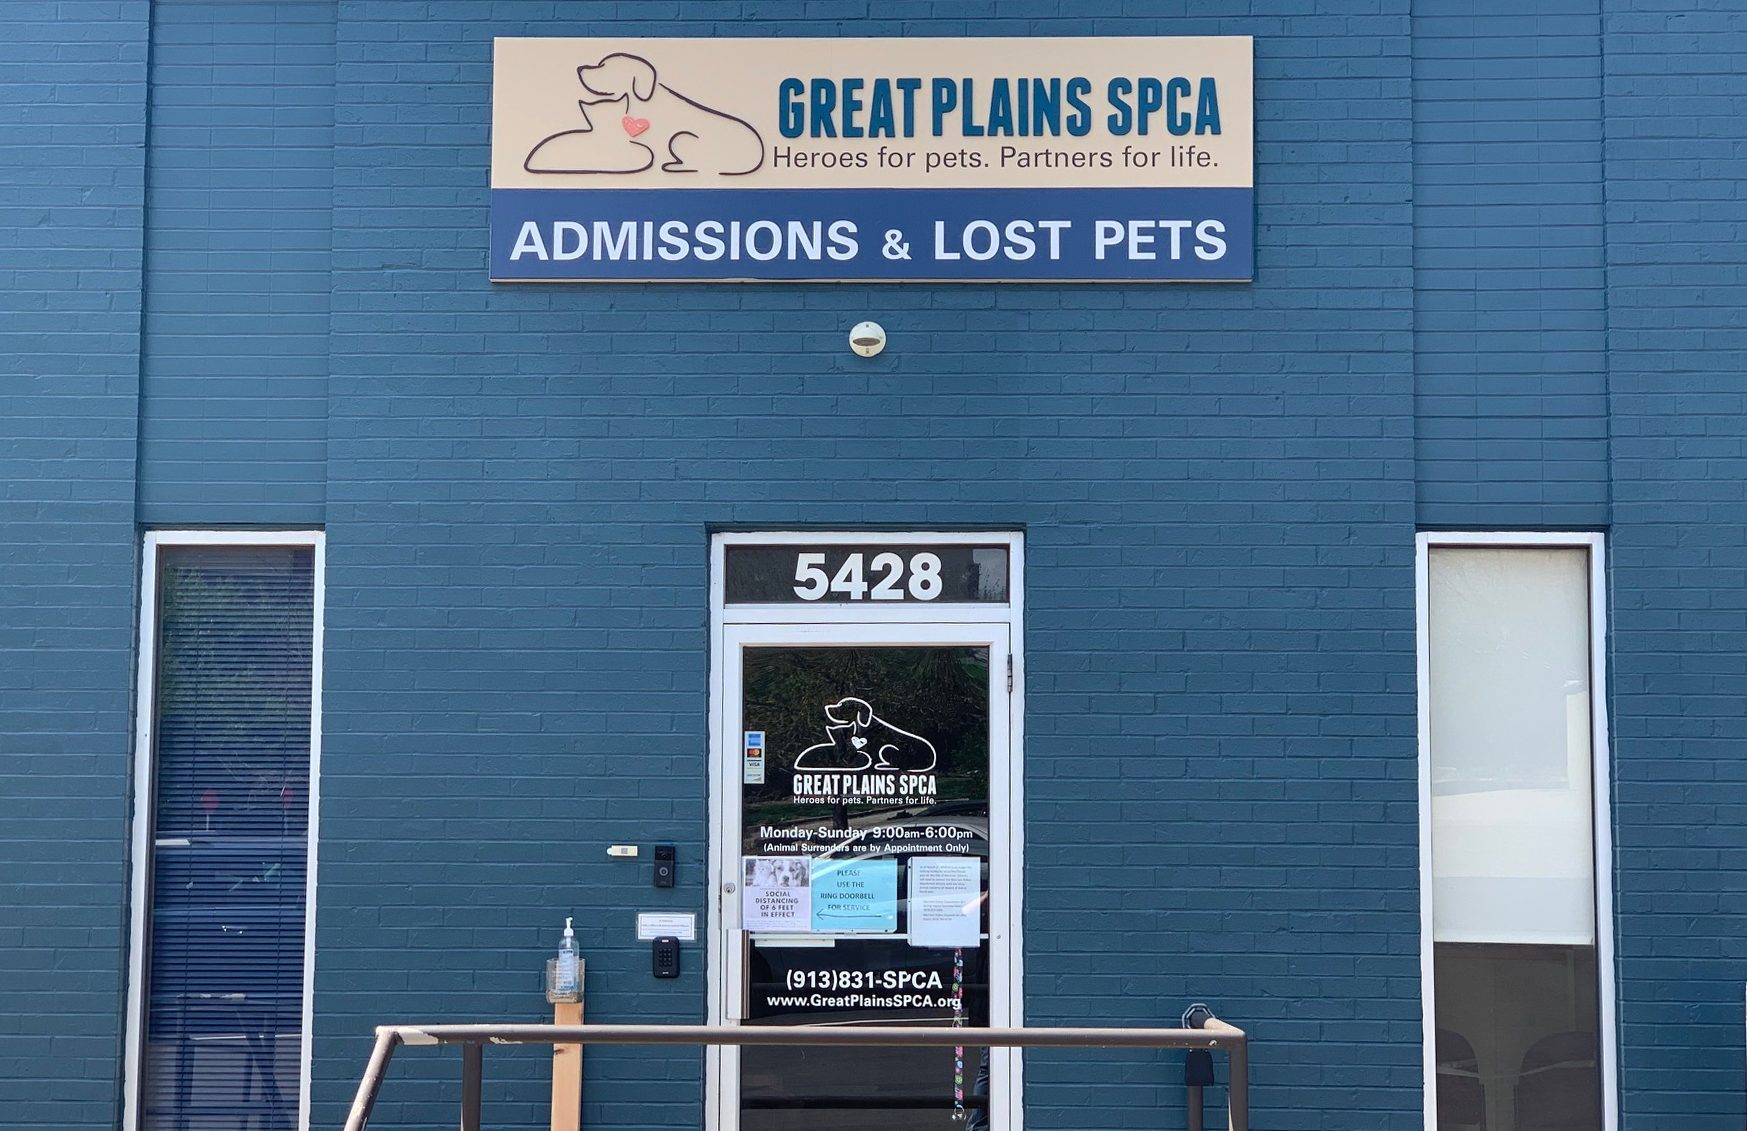 Great Plains SPCA - Lost Pets and Admissions